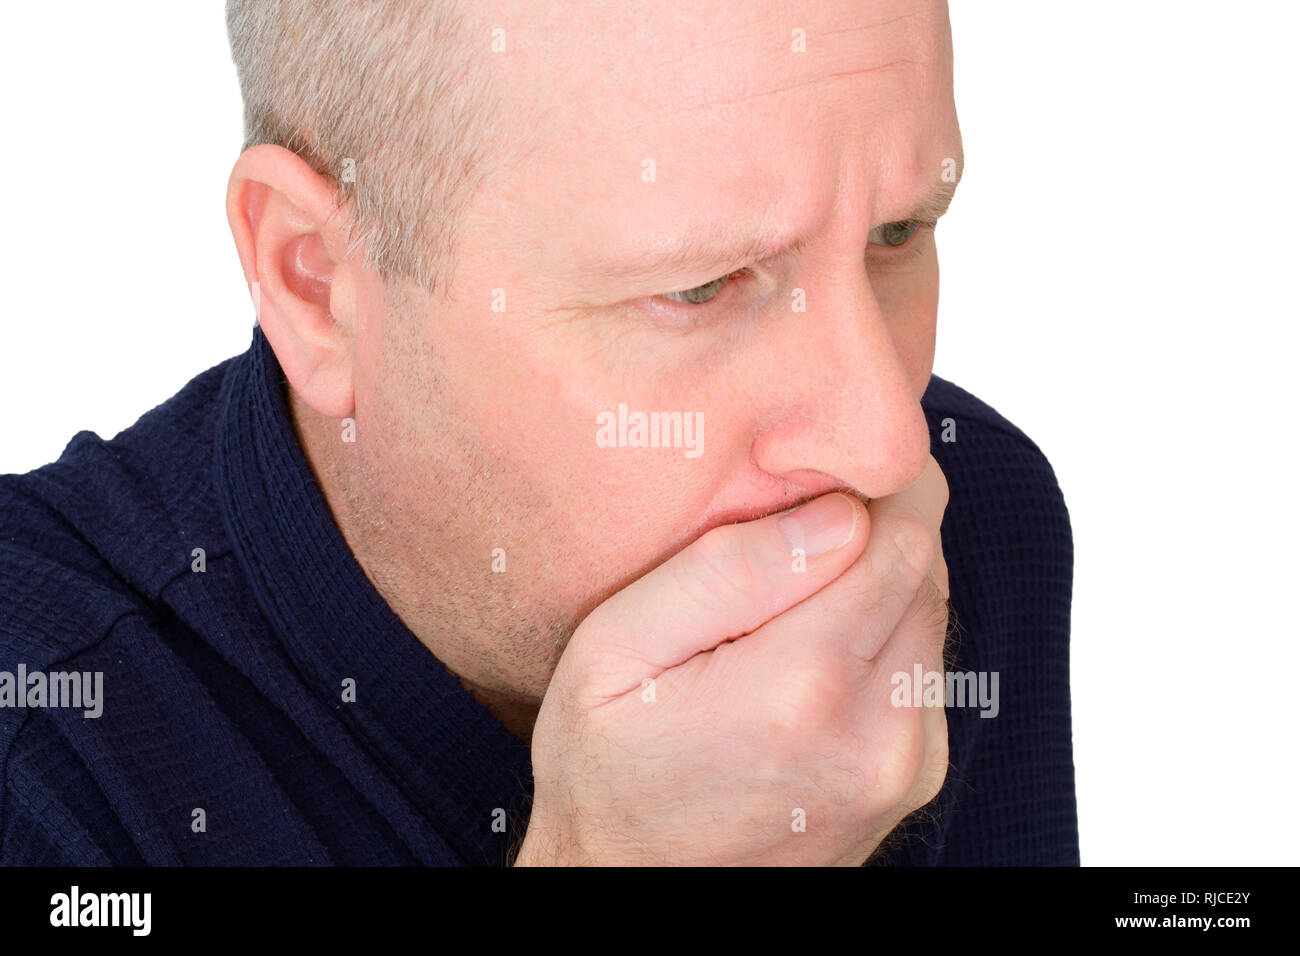 Caucasian male suffering nausea with hand over mouth. Stock Photo